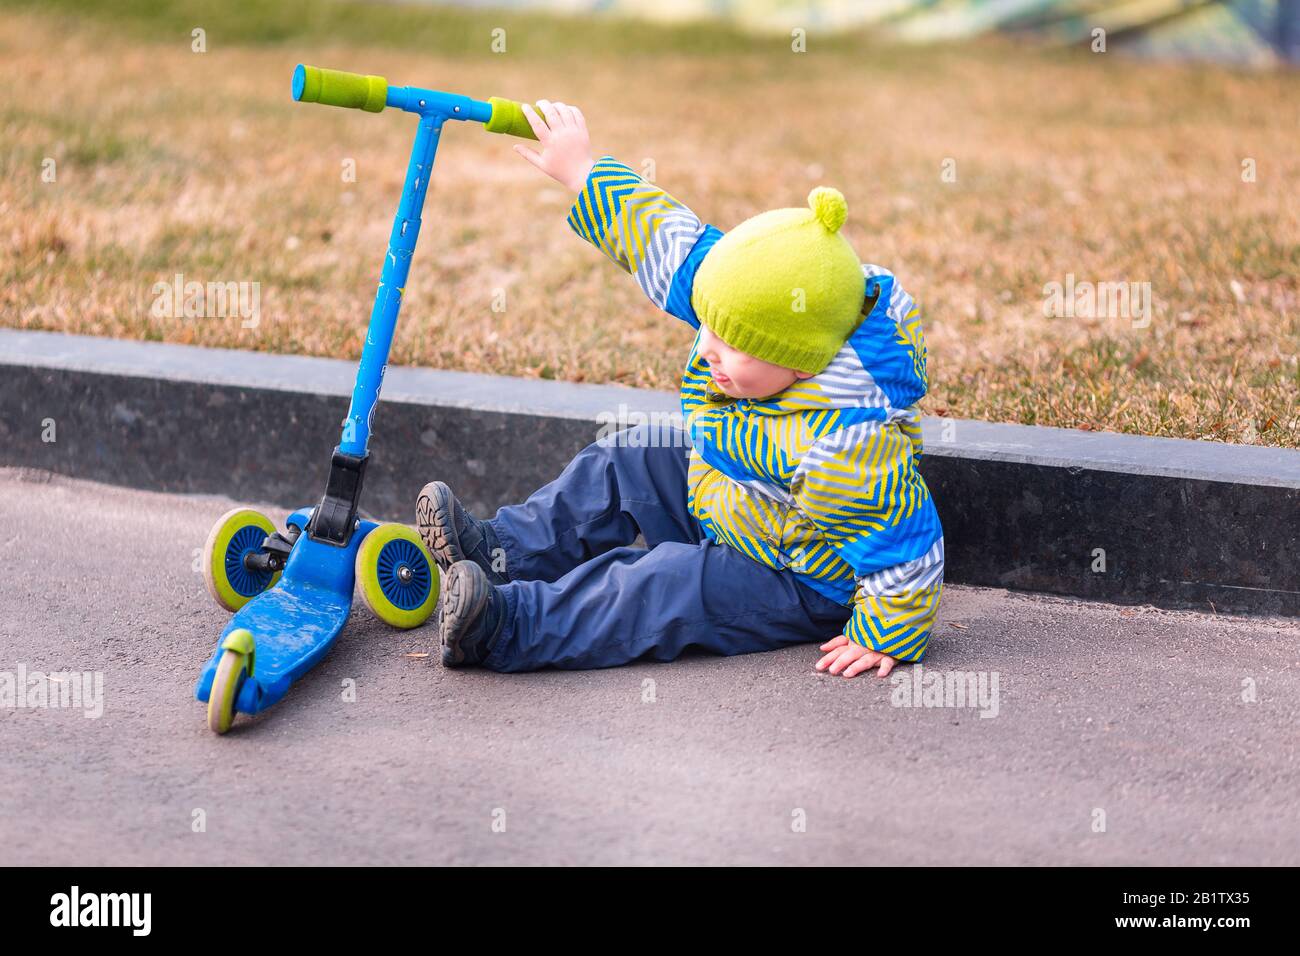 Cute little boy falling off his scooter . Kid getting hurt while riding a kick scooter. Falling scooter accident. Boy trying to stand up Stock Photo